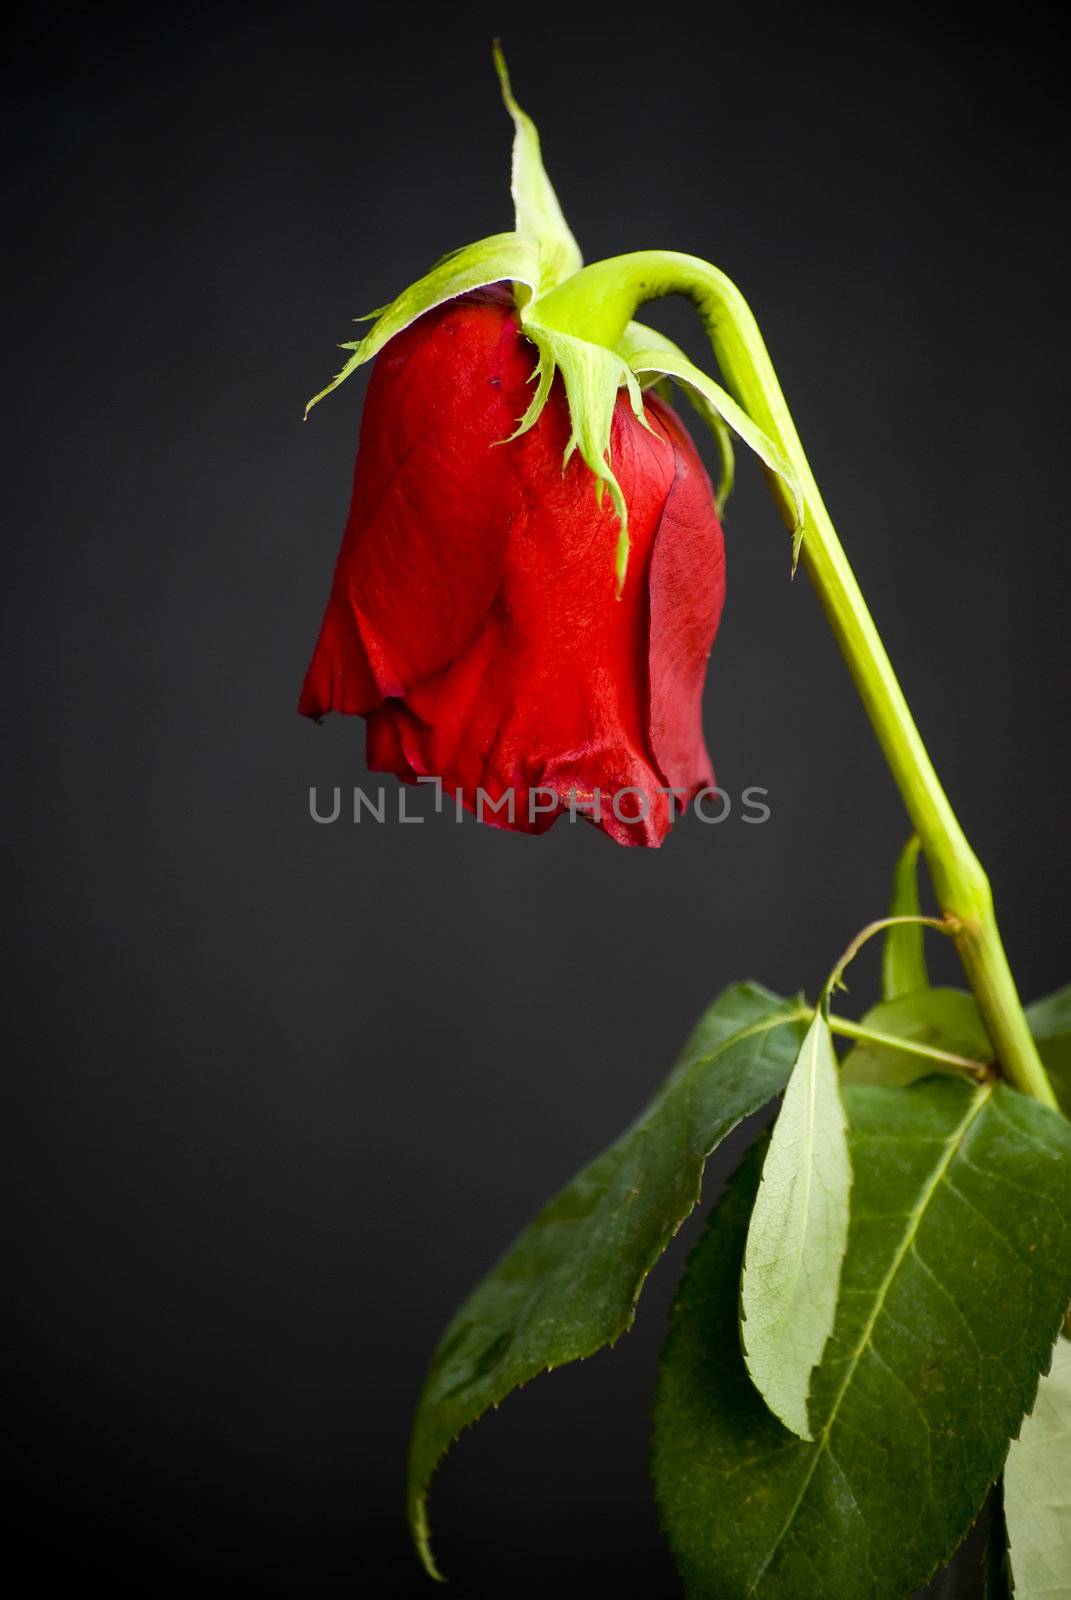 red dying rose on black background - lost love concept